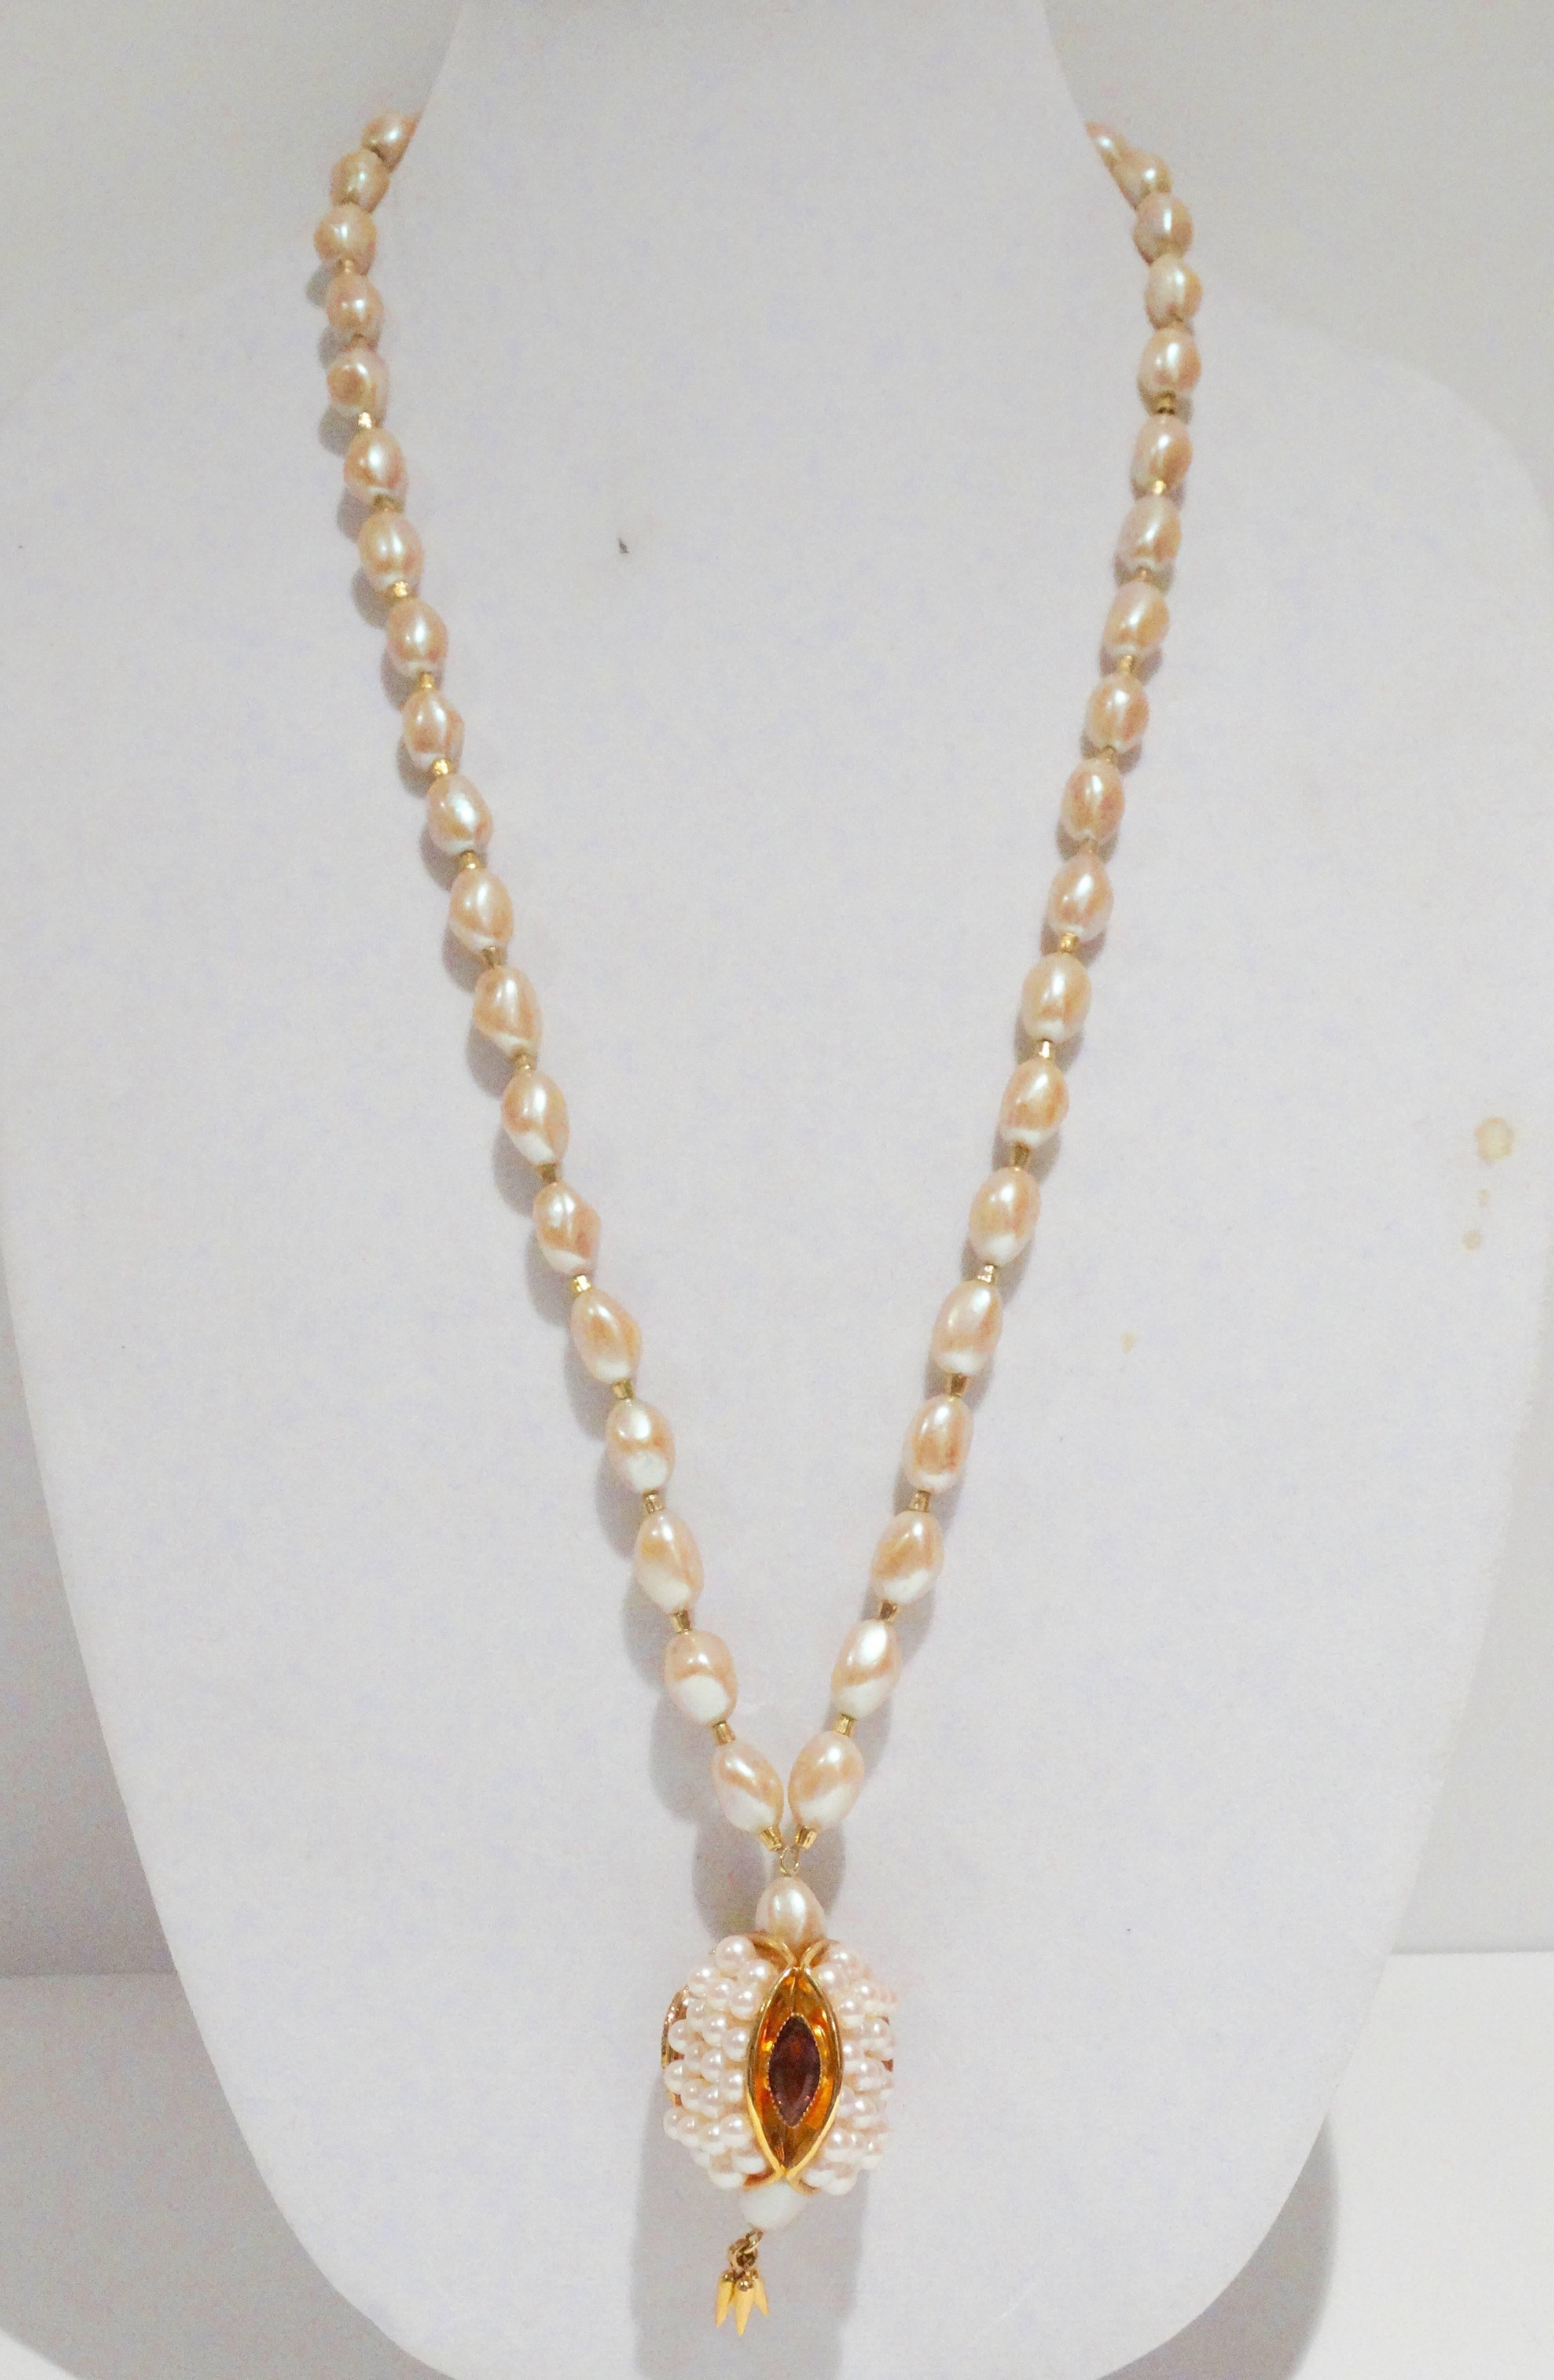 Fabulous 1970's Pearl deLillo necklace with a 3-D snake like head pendent. 3 large cat eye amyethest stones on pendent, pendent is in crusted with pearls. Necklace drops down 17